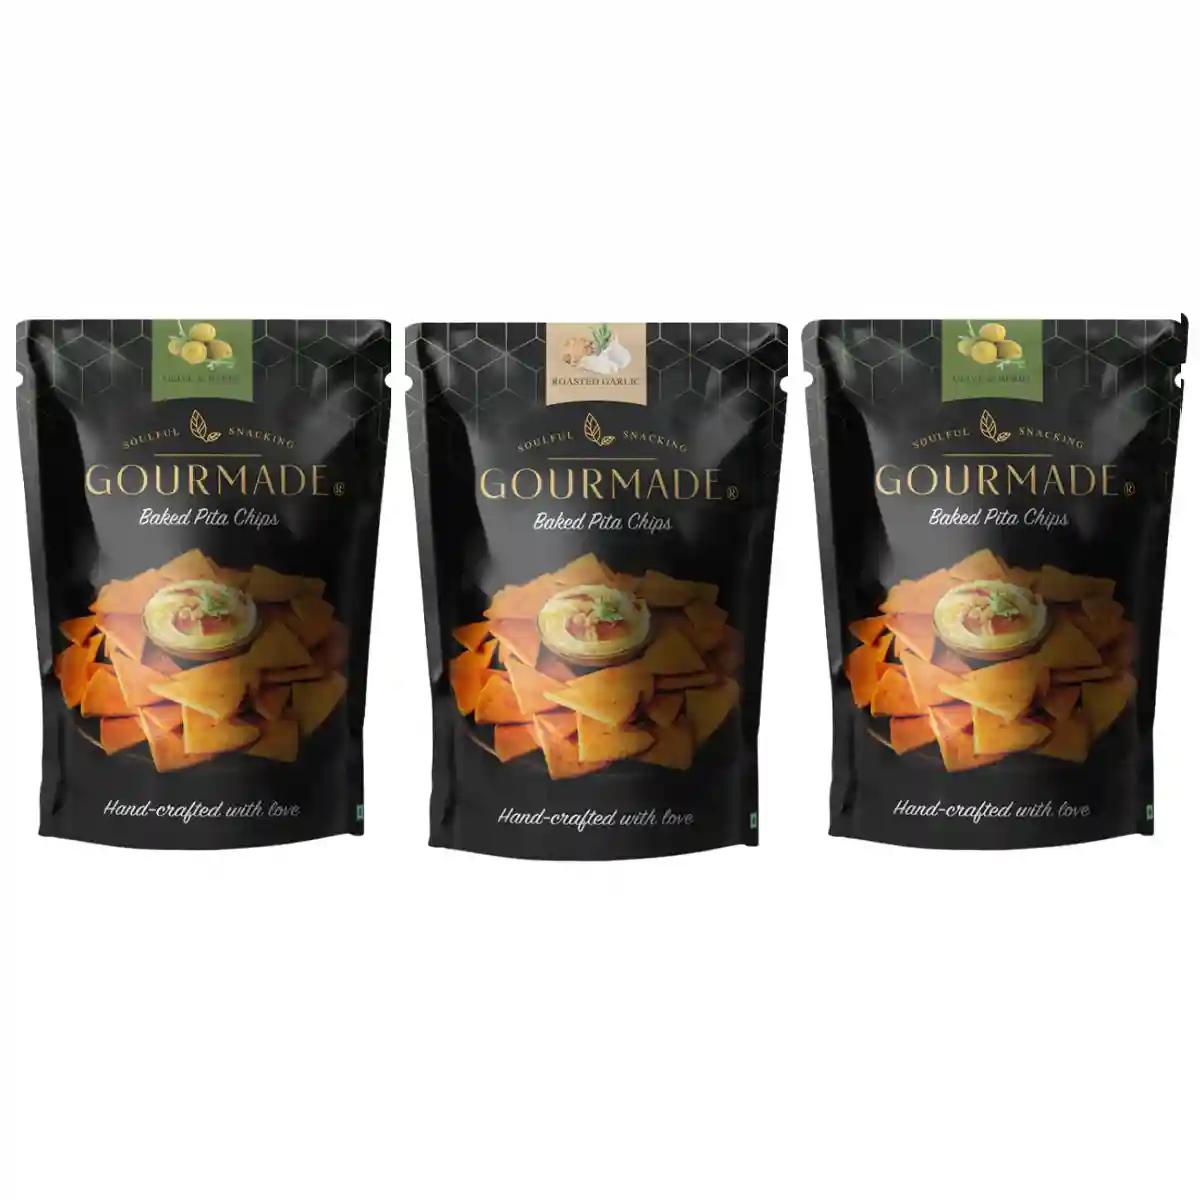 Gourmade Pita Chips Snacking Combo of 2 Olive & Herbs, 1 Roasted Garlic (375gm)